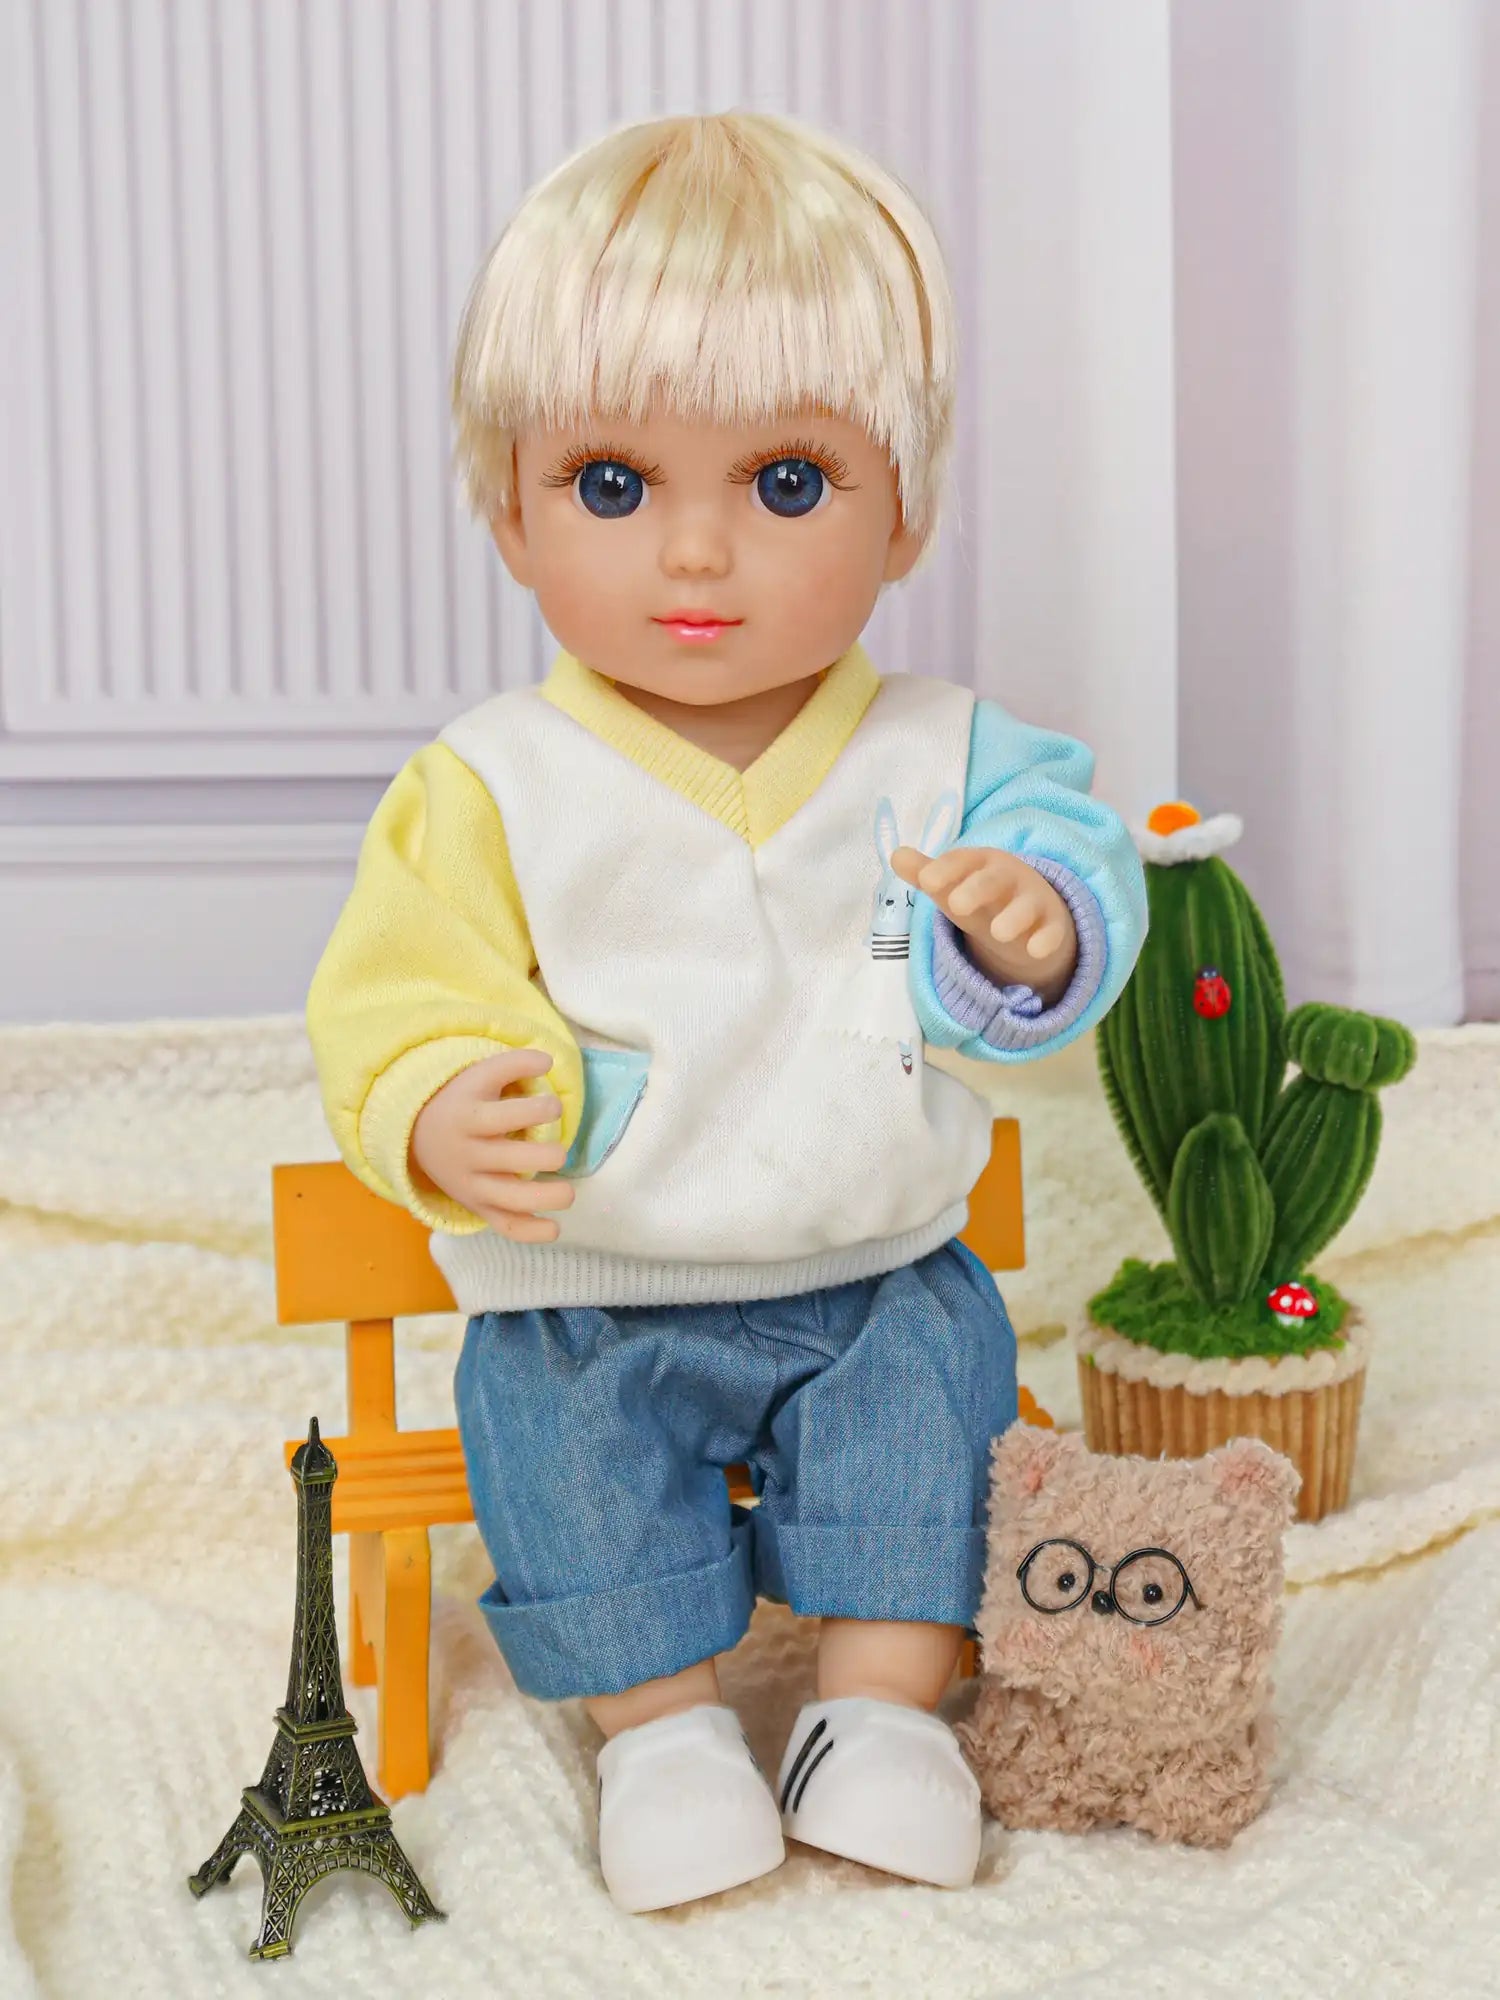 Blonde doll with blue eyes, yellow cardigan, and denim pants, seated by a toy Eiffel Tower.